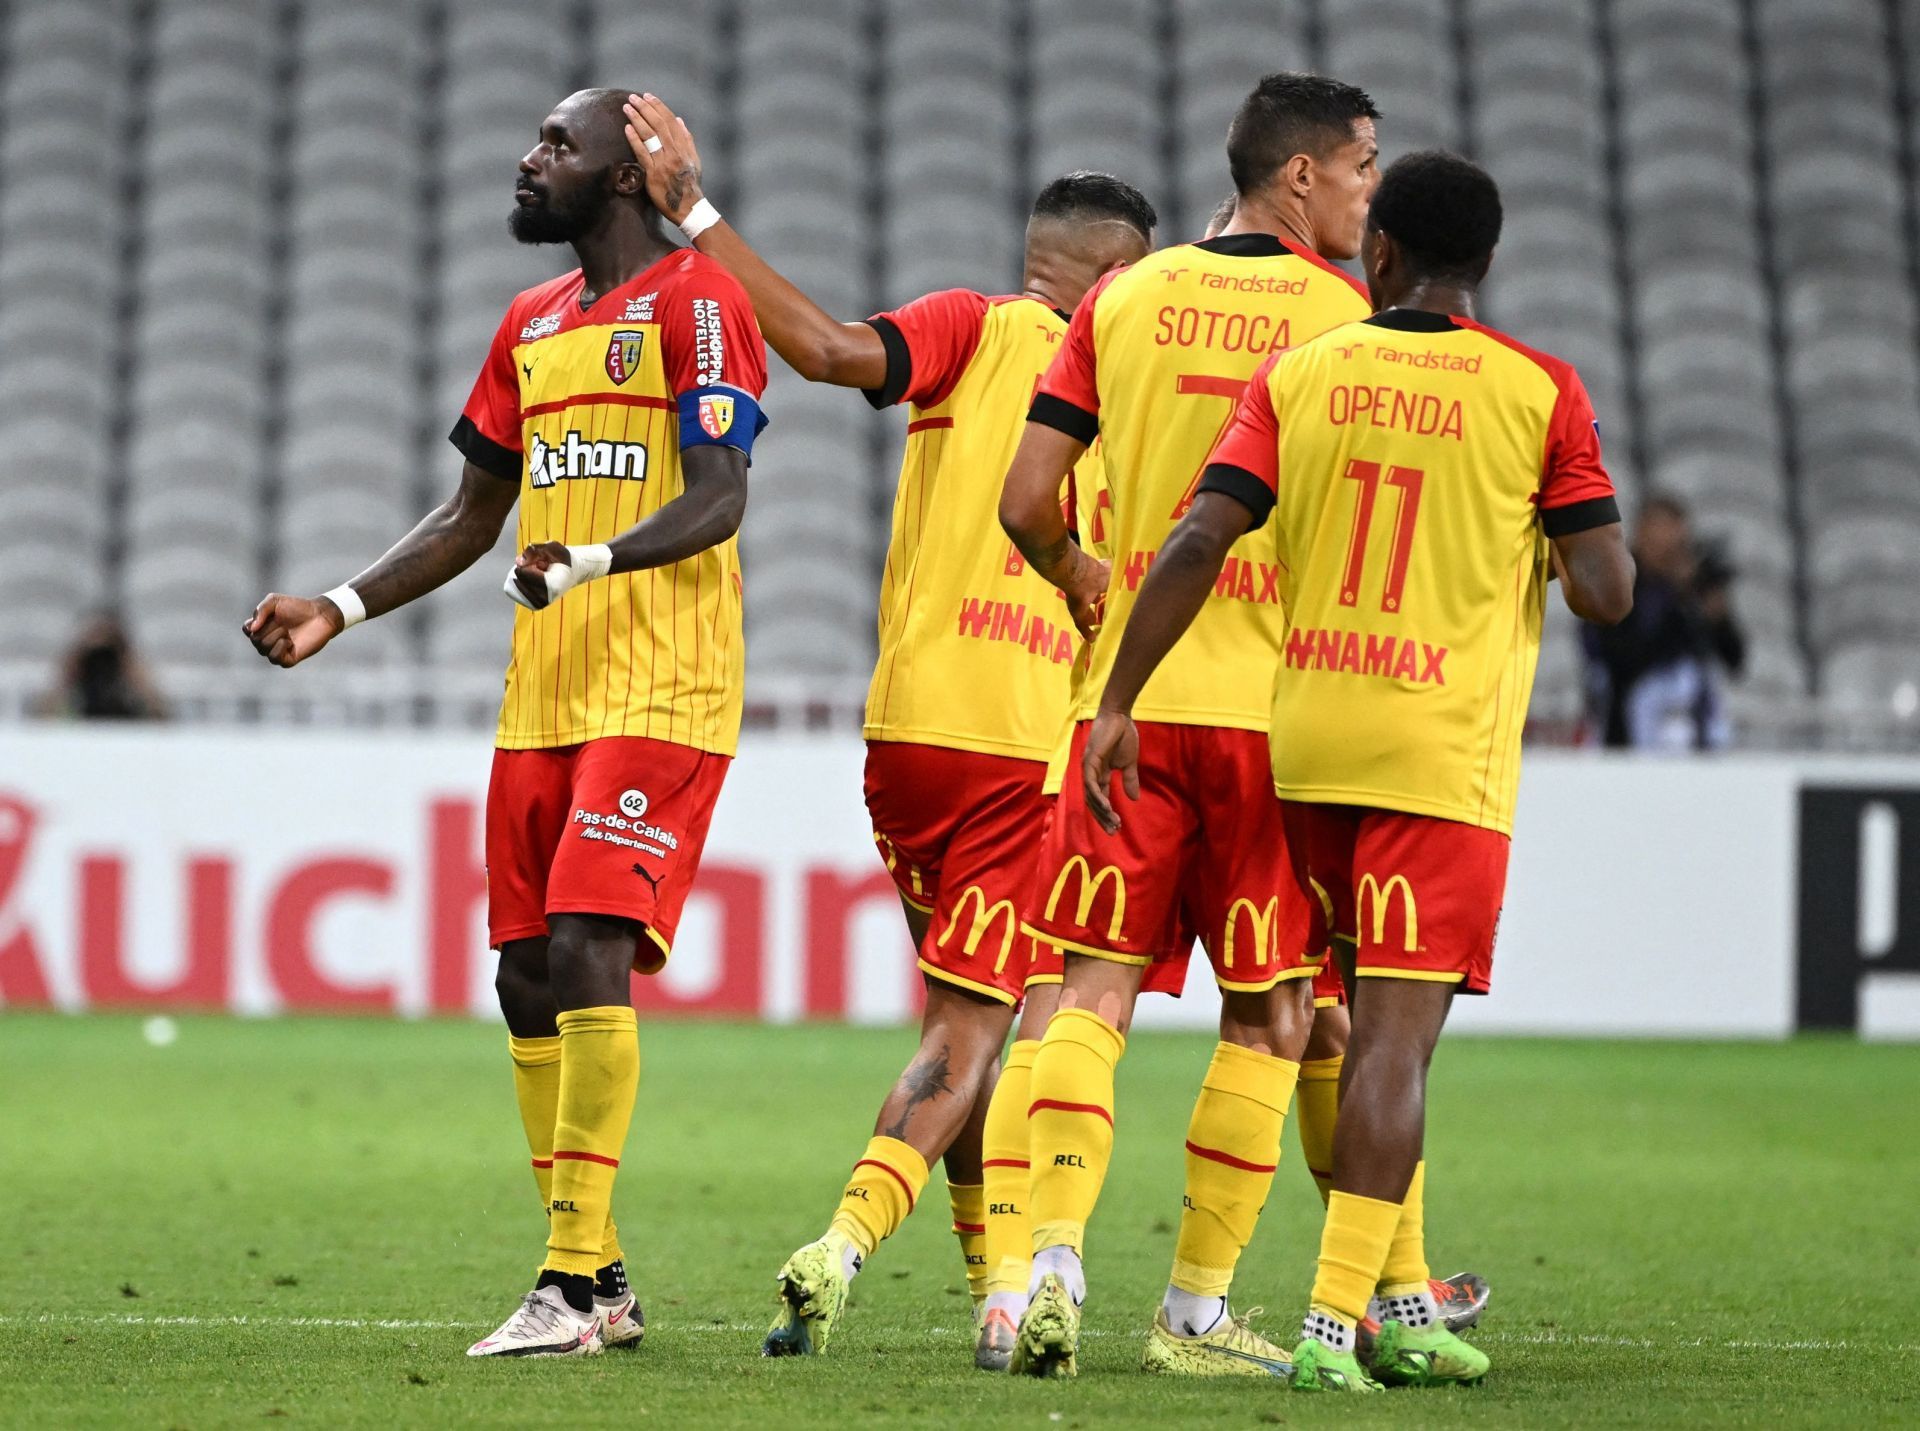 Lens will host Lorient on Wednesday - Ligue 1 